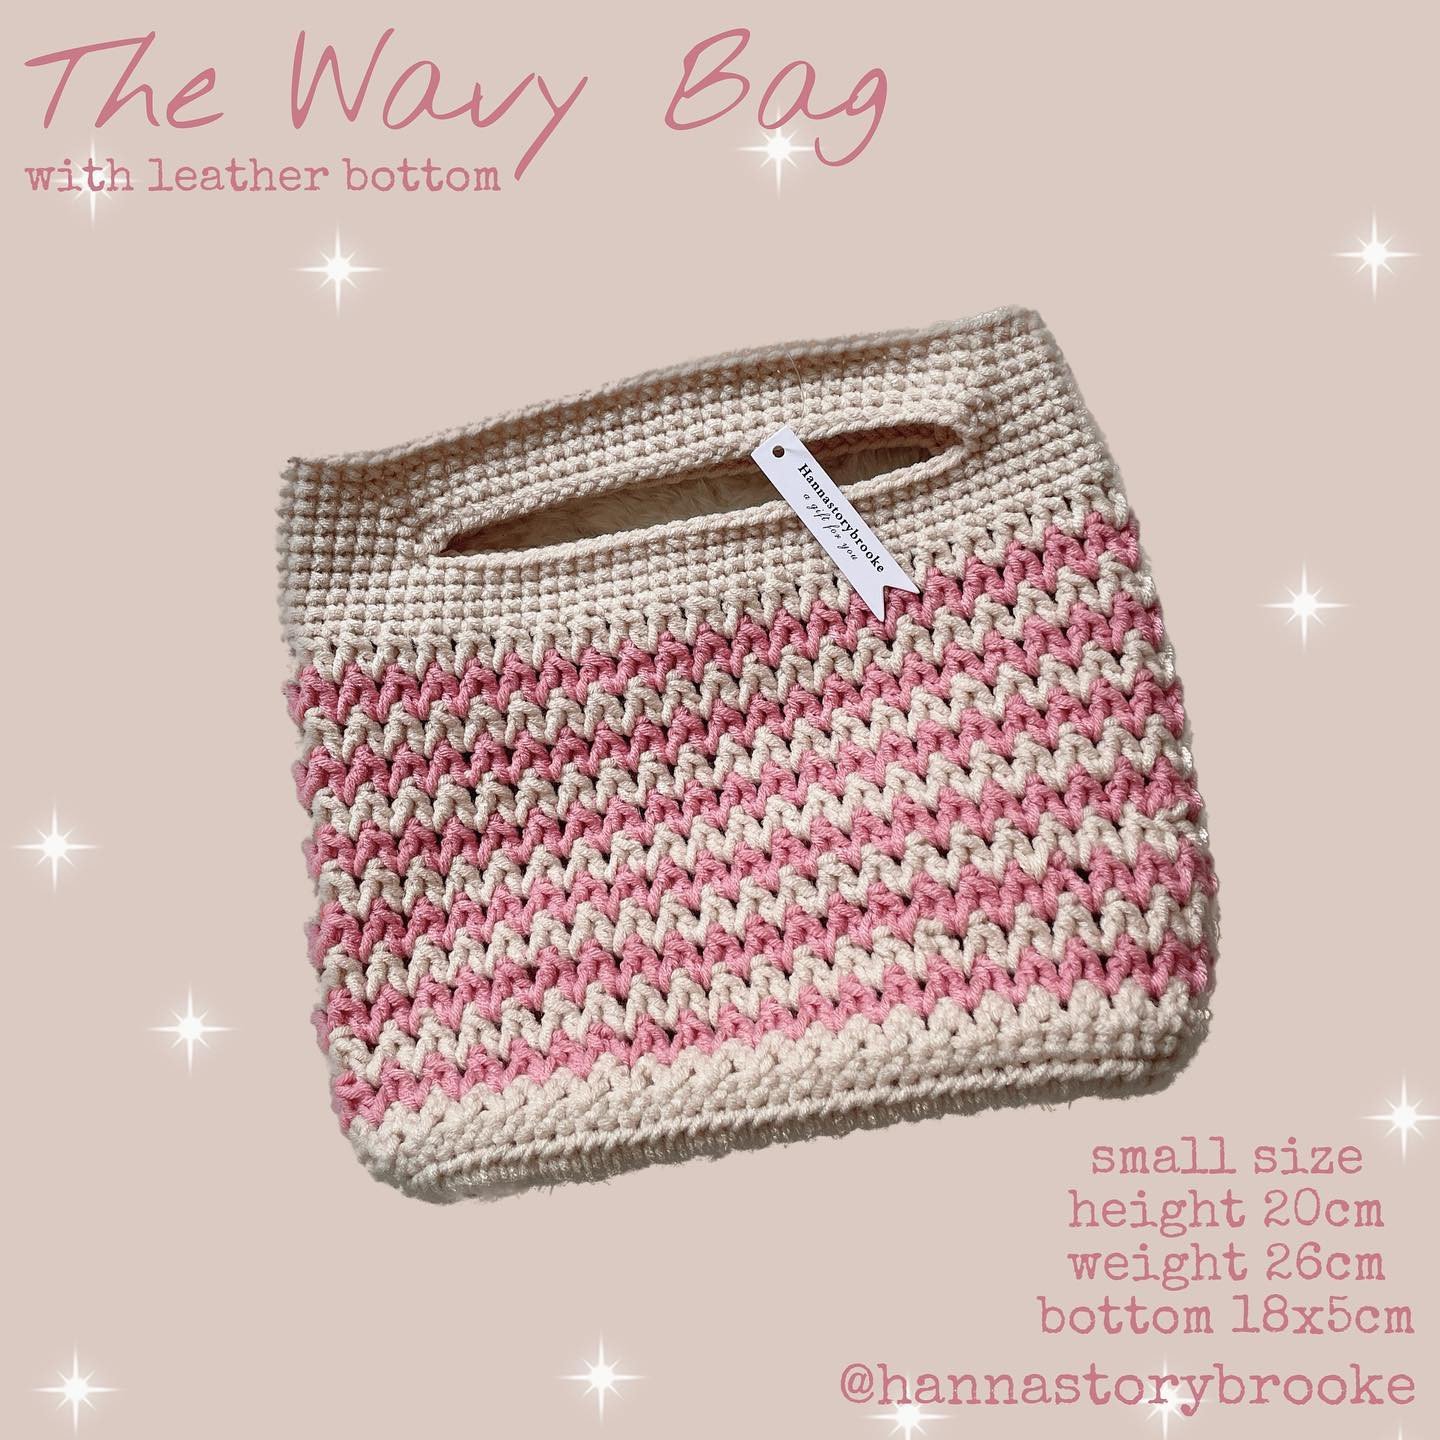 Wavy Bag with Leather Bottom